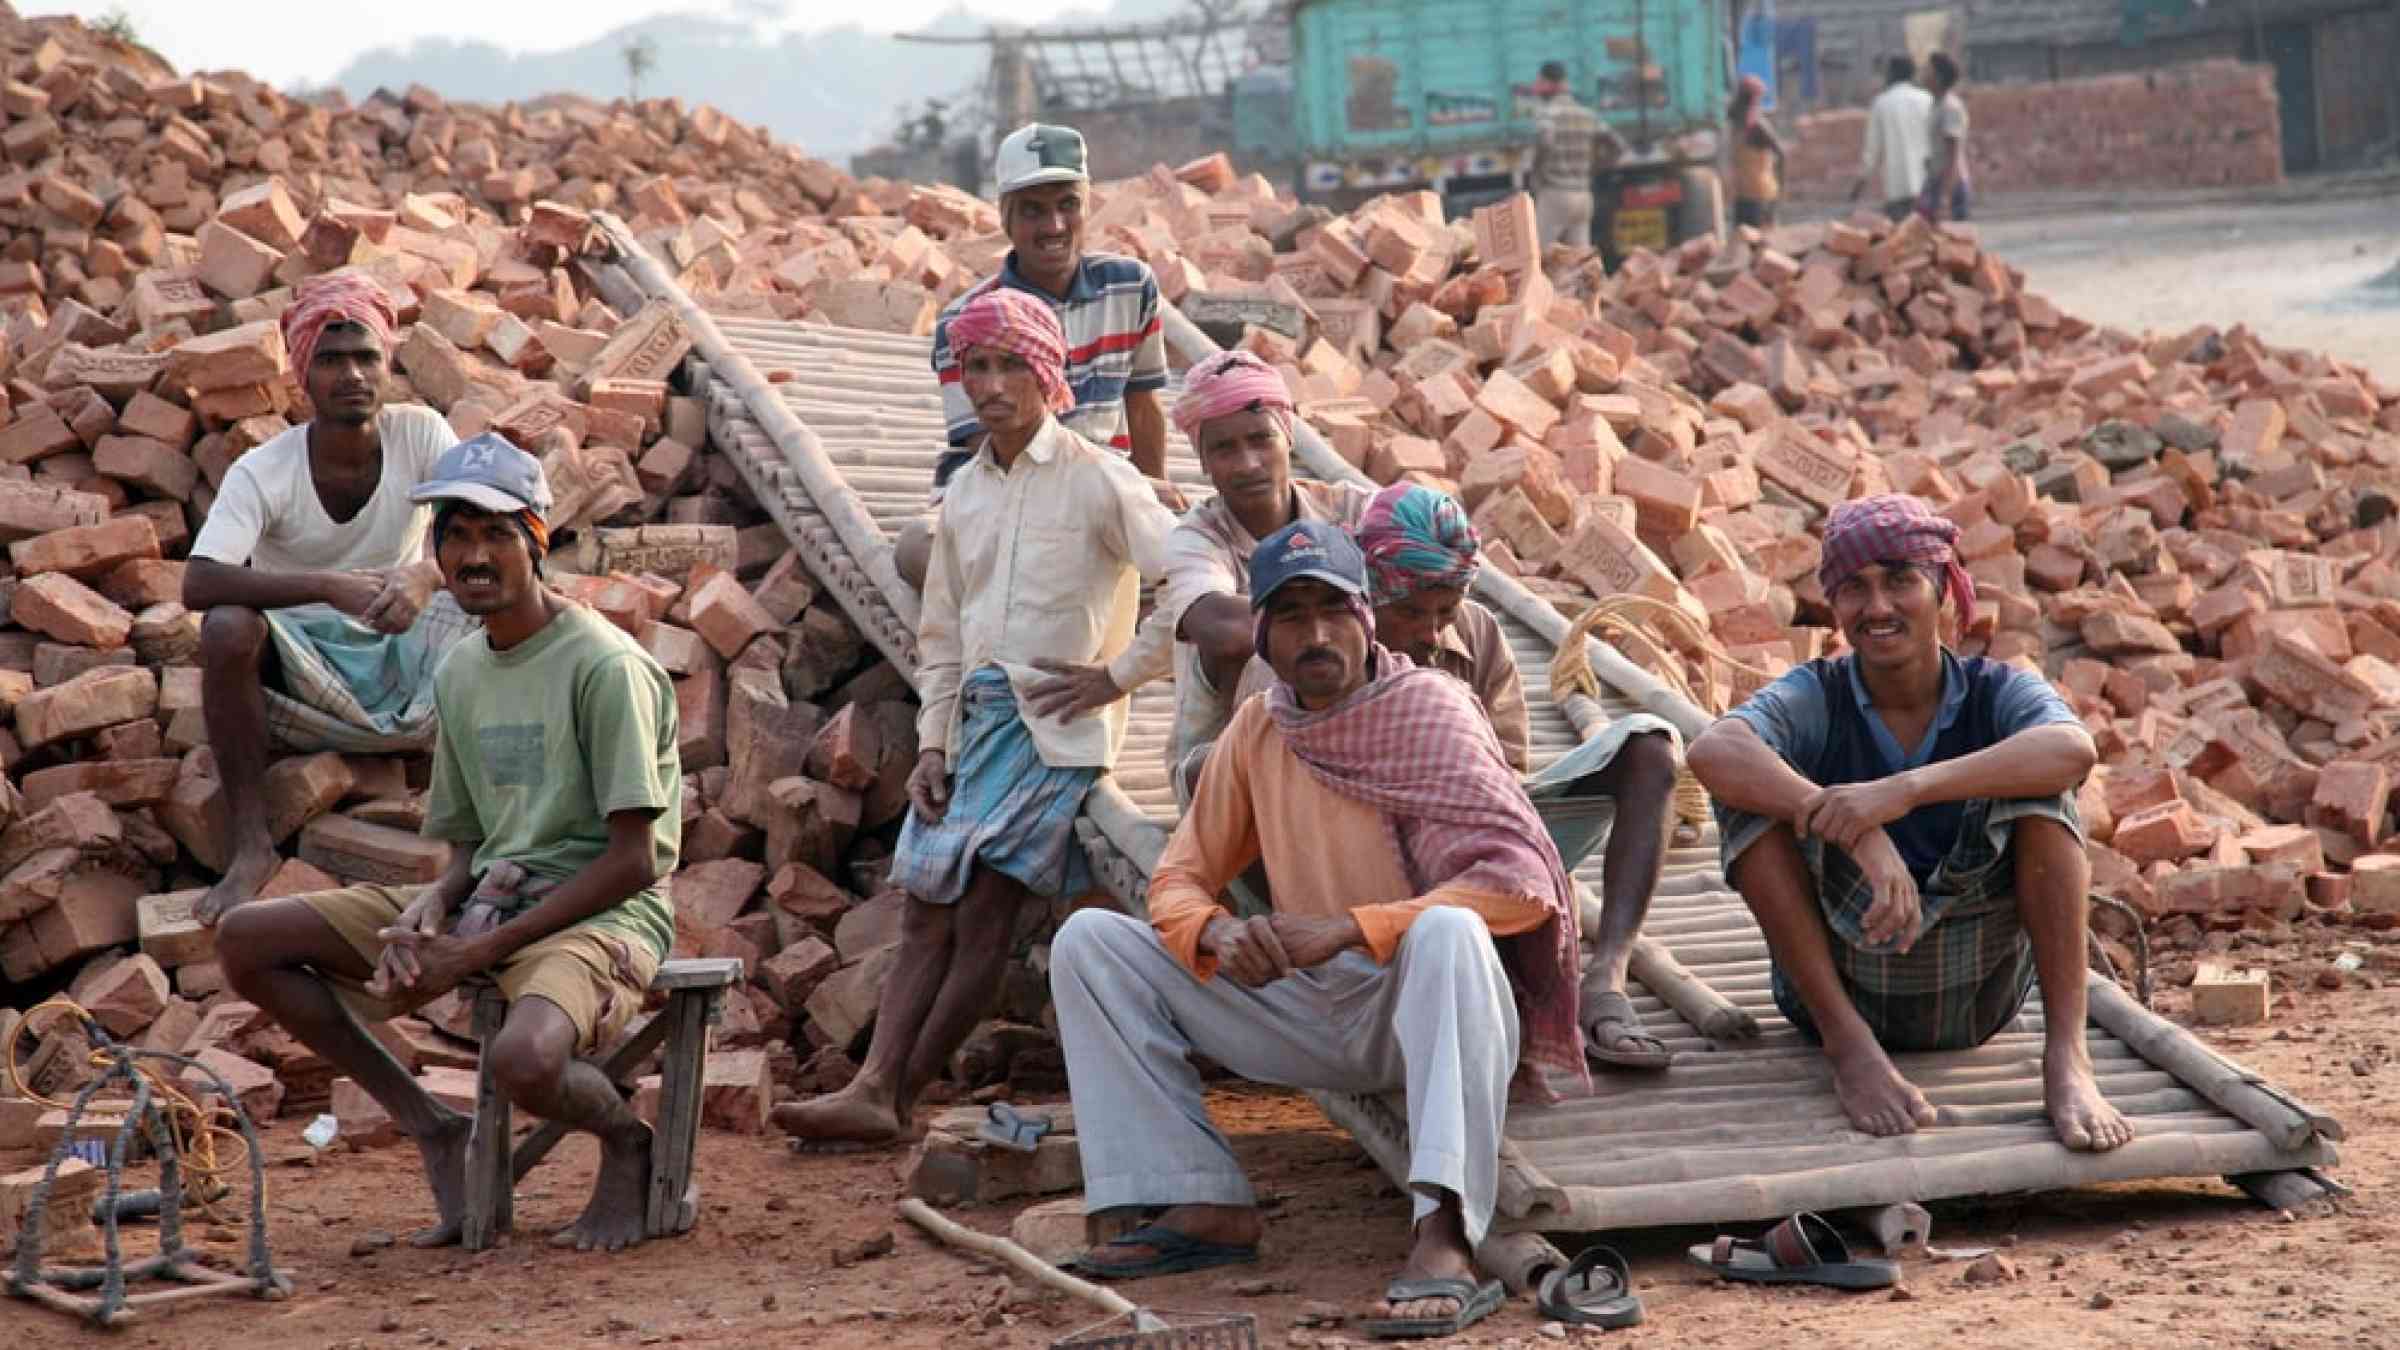 Brick field workers rest after hard work, wearing just baked brick from the kiln in truck